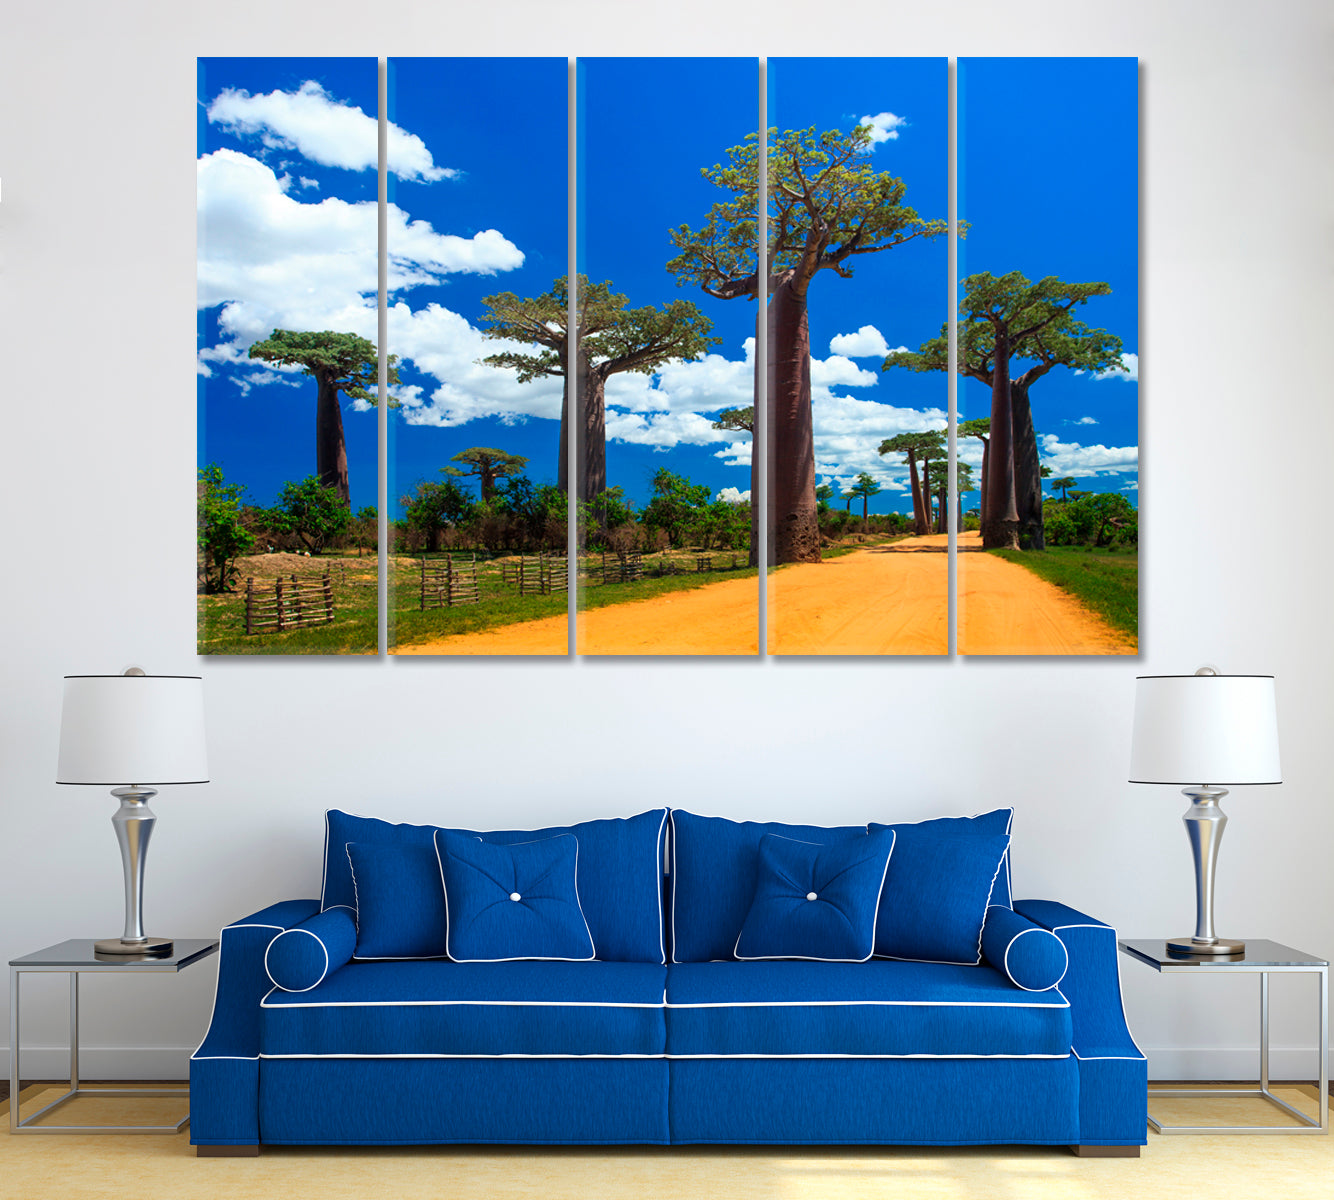 Avenue of Baobabs Madagascar Canvas Print ArtLexy 5 Panels 36"x24" inches 